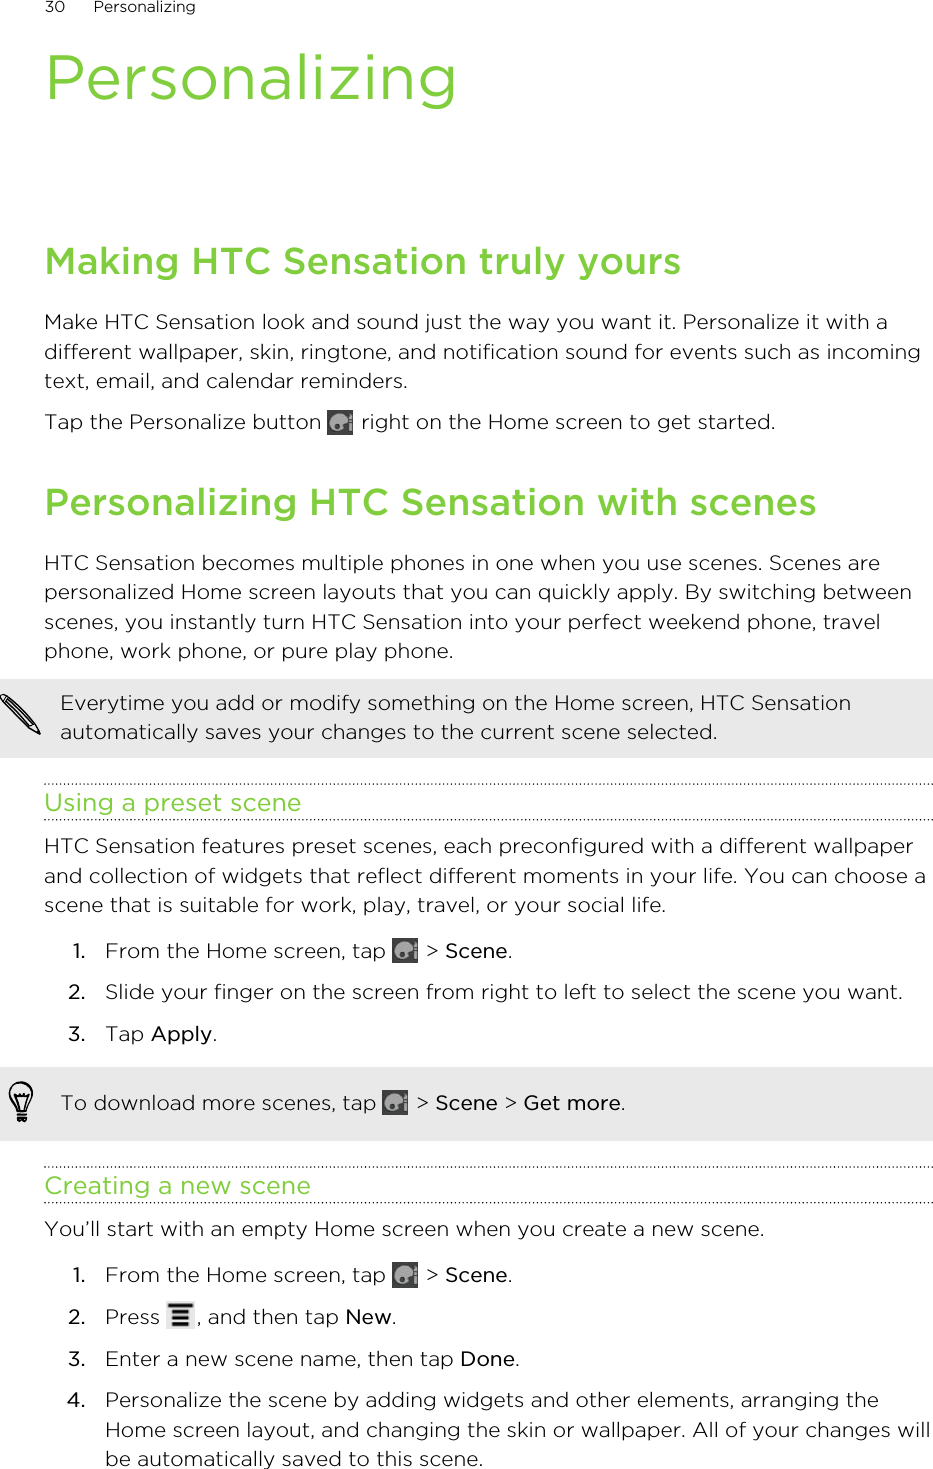 PersonalizingMaking HTC Sensation truly yoursMake HTC Sensation look and sound just the way you want it. Personalize it with adifferent wallpaper, skin, ringtone, and notification sound for events such as incomingtext, email, and calendar reminders.Tap the Personalize button   right on the Home screen to get started.Personalizing HTC Sensation with scenesHTC Sensation becomes multiple phones in one when you use scenes. Scenes arepersonalized Home screen layouts that you can quickly apply. By switching betweenscenes, you instantly turn HTC Sensation into your perfect weekend phone, travelphone, work phone, or pure play phone.Everytime you add or modify something on the Home screen, HTC Sensationautomatically saves your changes to the current scene selected.Using a preset sceneHTC Sensation features preset scenes, each preconfigured with a different wallpaperand collection of widgets that reflect different moments in your life. You can choose ascene that is suitable for work, play, travel, or your social life.1. From the Home screen, tap   &gt; Scene.2. Slide your finger on the screen from right to left to select the scene you want.3. Tap Apply.To download more scenes, tap   &gt; Scene &gt; Get more.Creating a new sceneYou’ll start with an empty Home screen when you create a new scene.1. From the Home screen, tap   &gt; Scene.2. Press  , and then tap New.3. Enter a new scene name, then tap Done.4. Personalize the scene by adding widgets and other elements, arranging theHome screen layout, and changing the skin or wallpaper. All of your changes willbe automatically saved to this scene.30 Personalizing